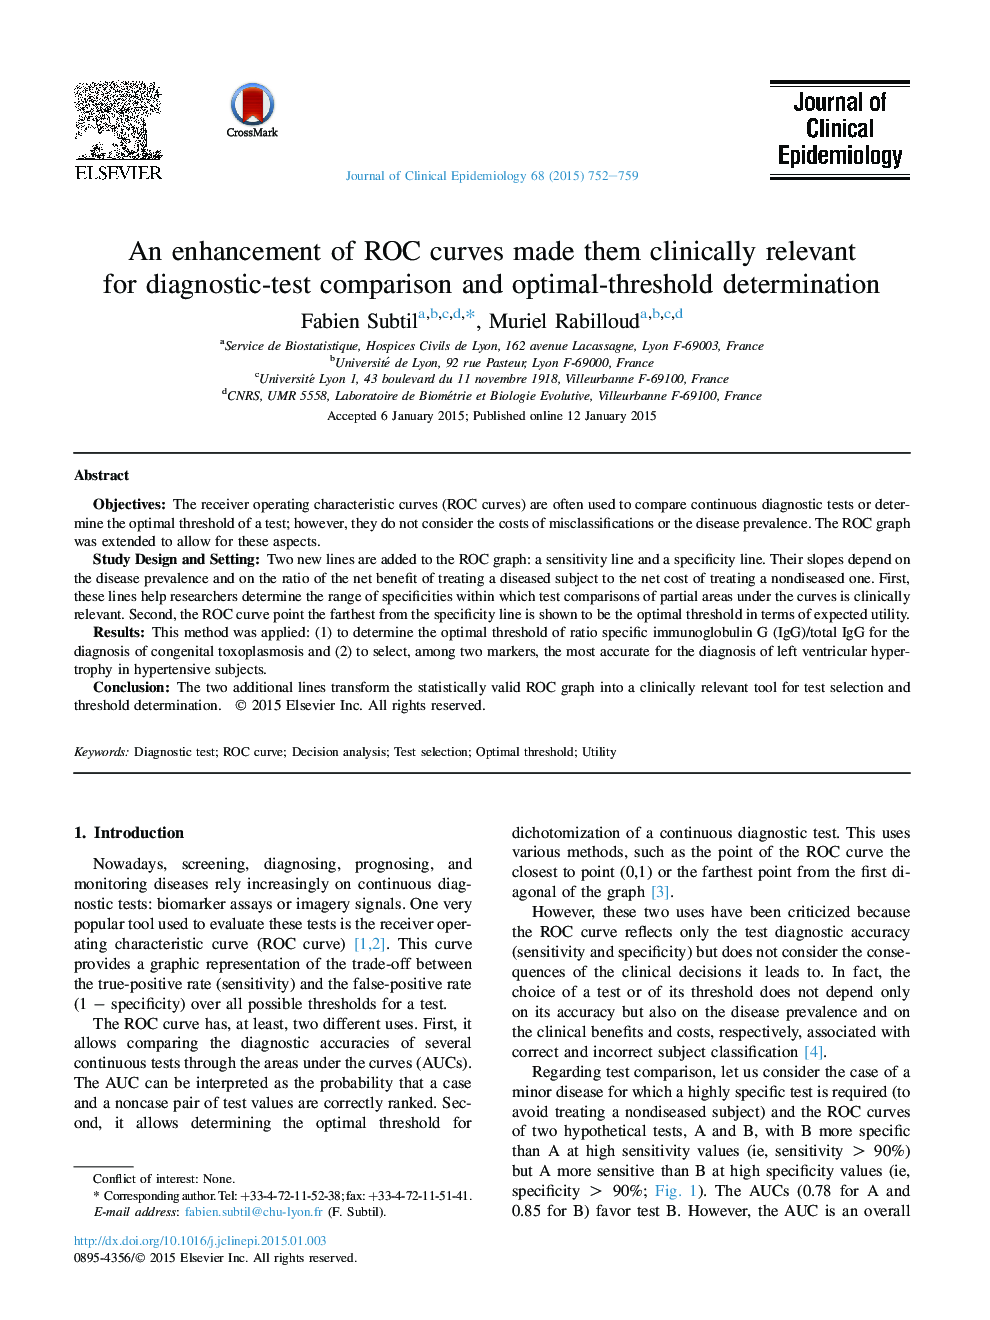 An enhancement of ROC curves made them clinically relevant for diagnostic-test comparison and optimal-threshold determination